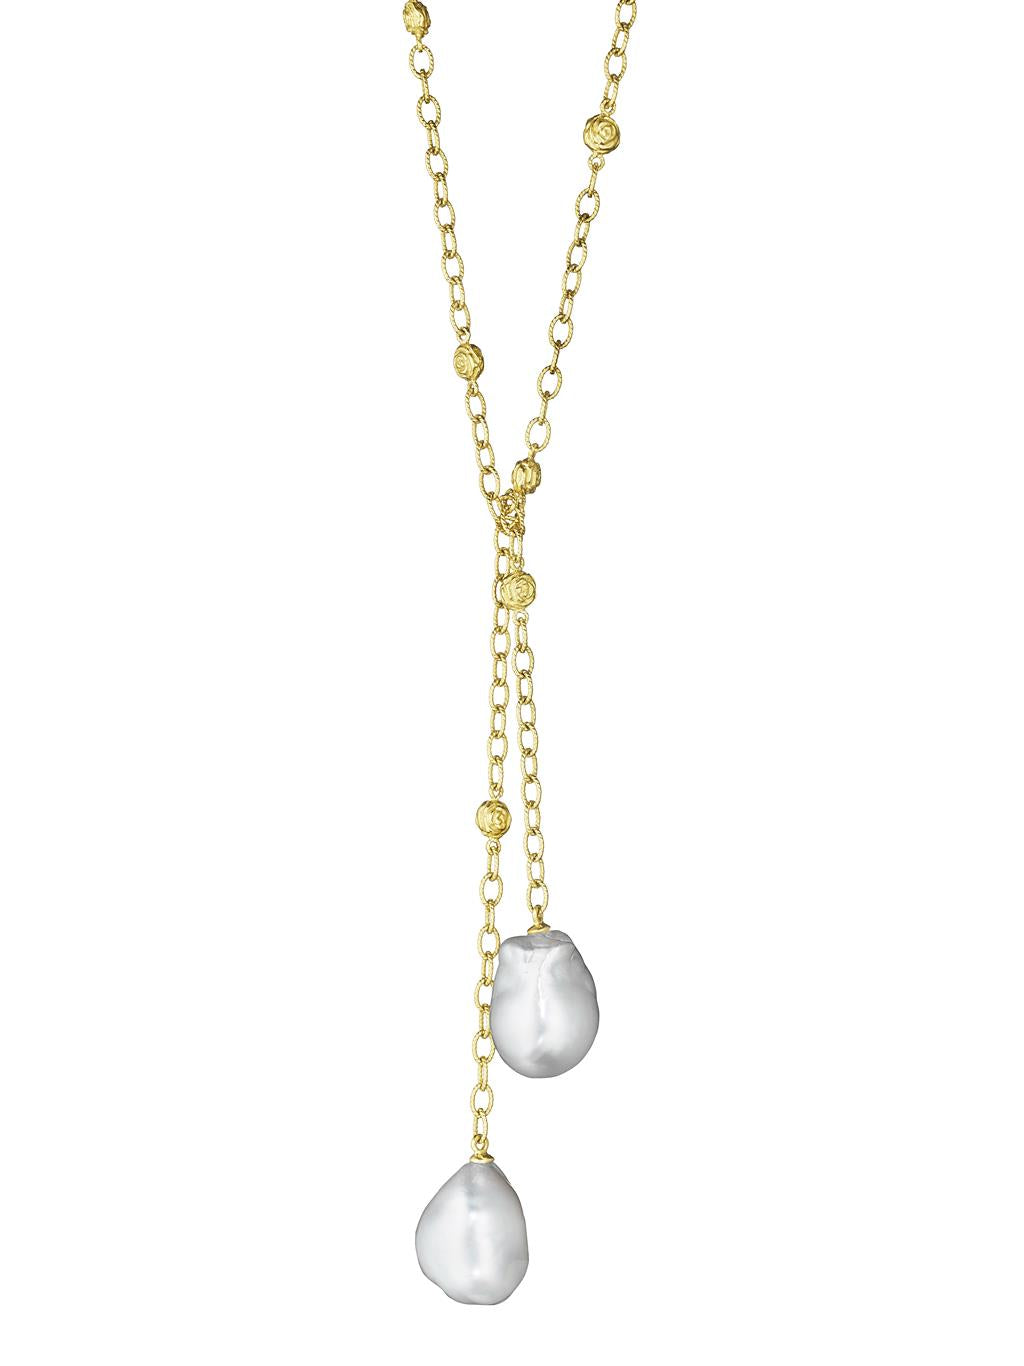 Penny Preville Rose Bud Pearl Lariat